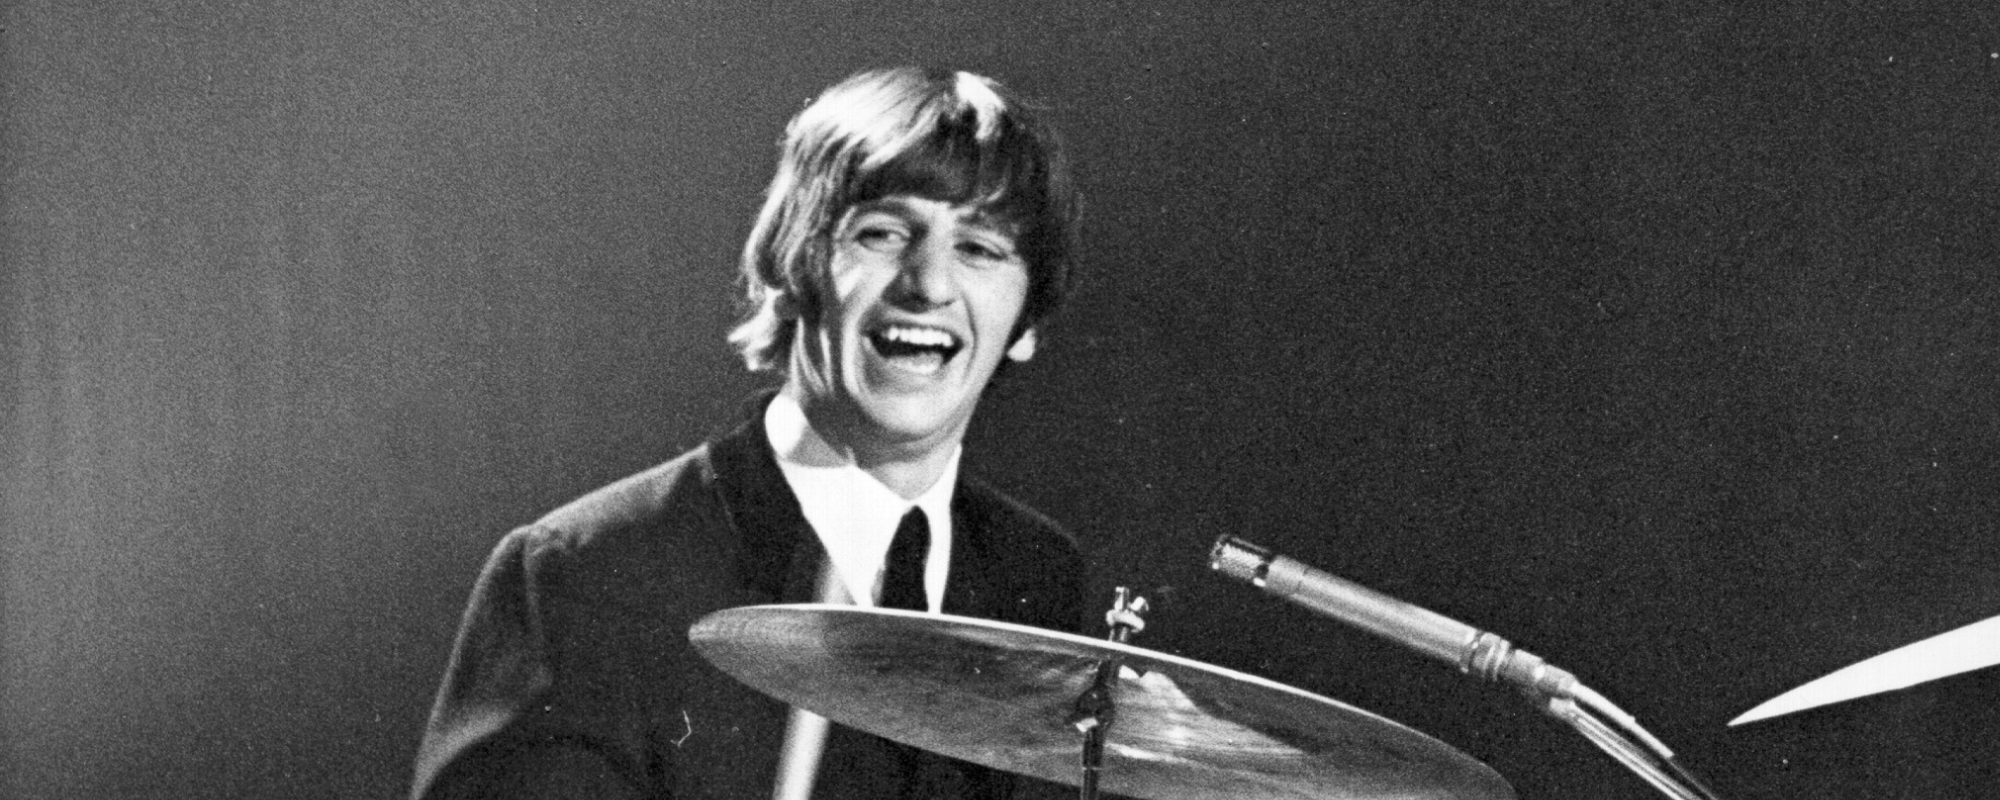 The Beatles Song Ringo Starr Didn’t Like Recording